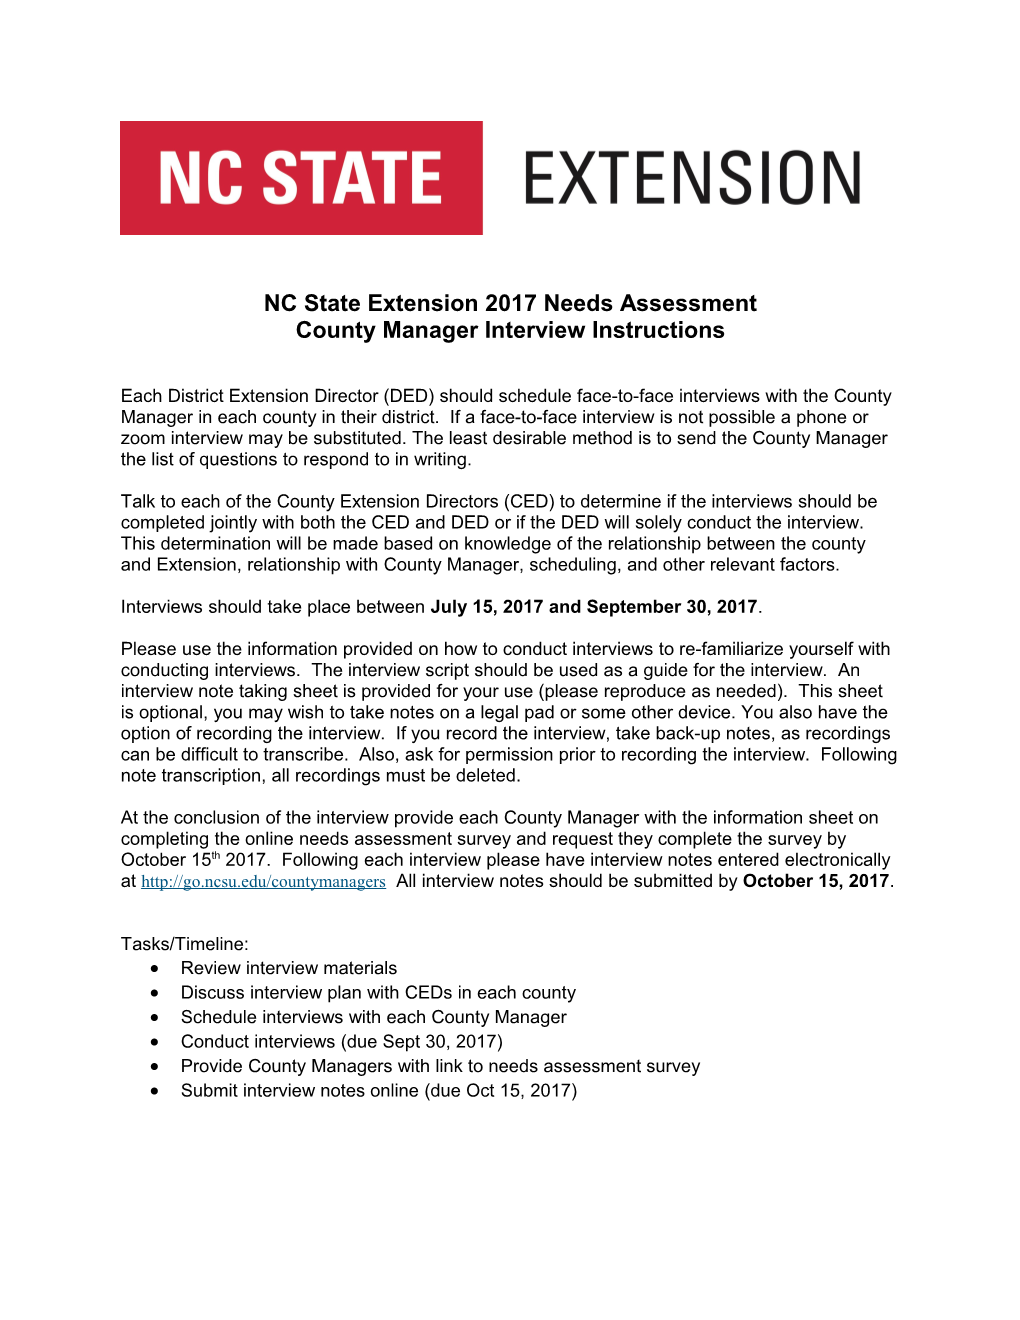 NC State Extension 2017 Needs Assessment